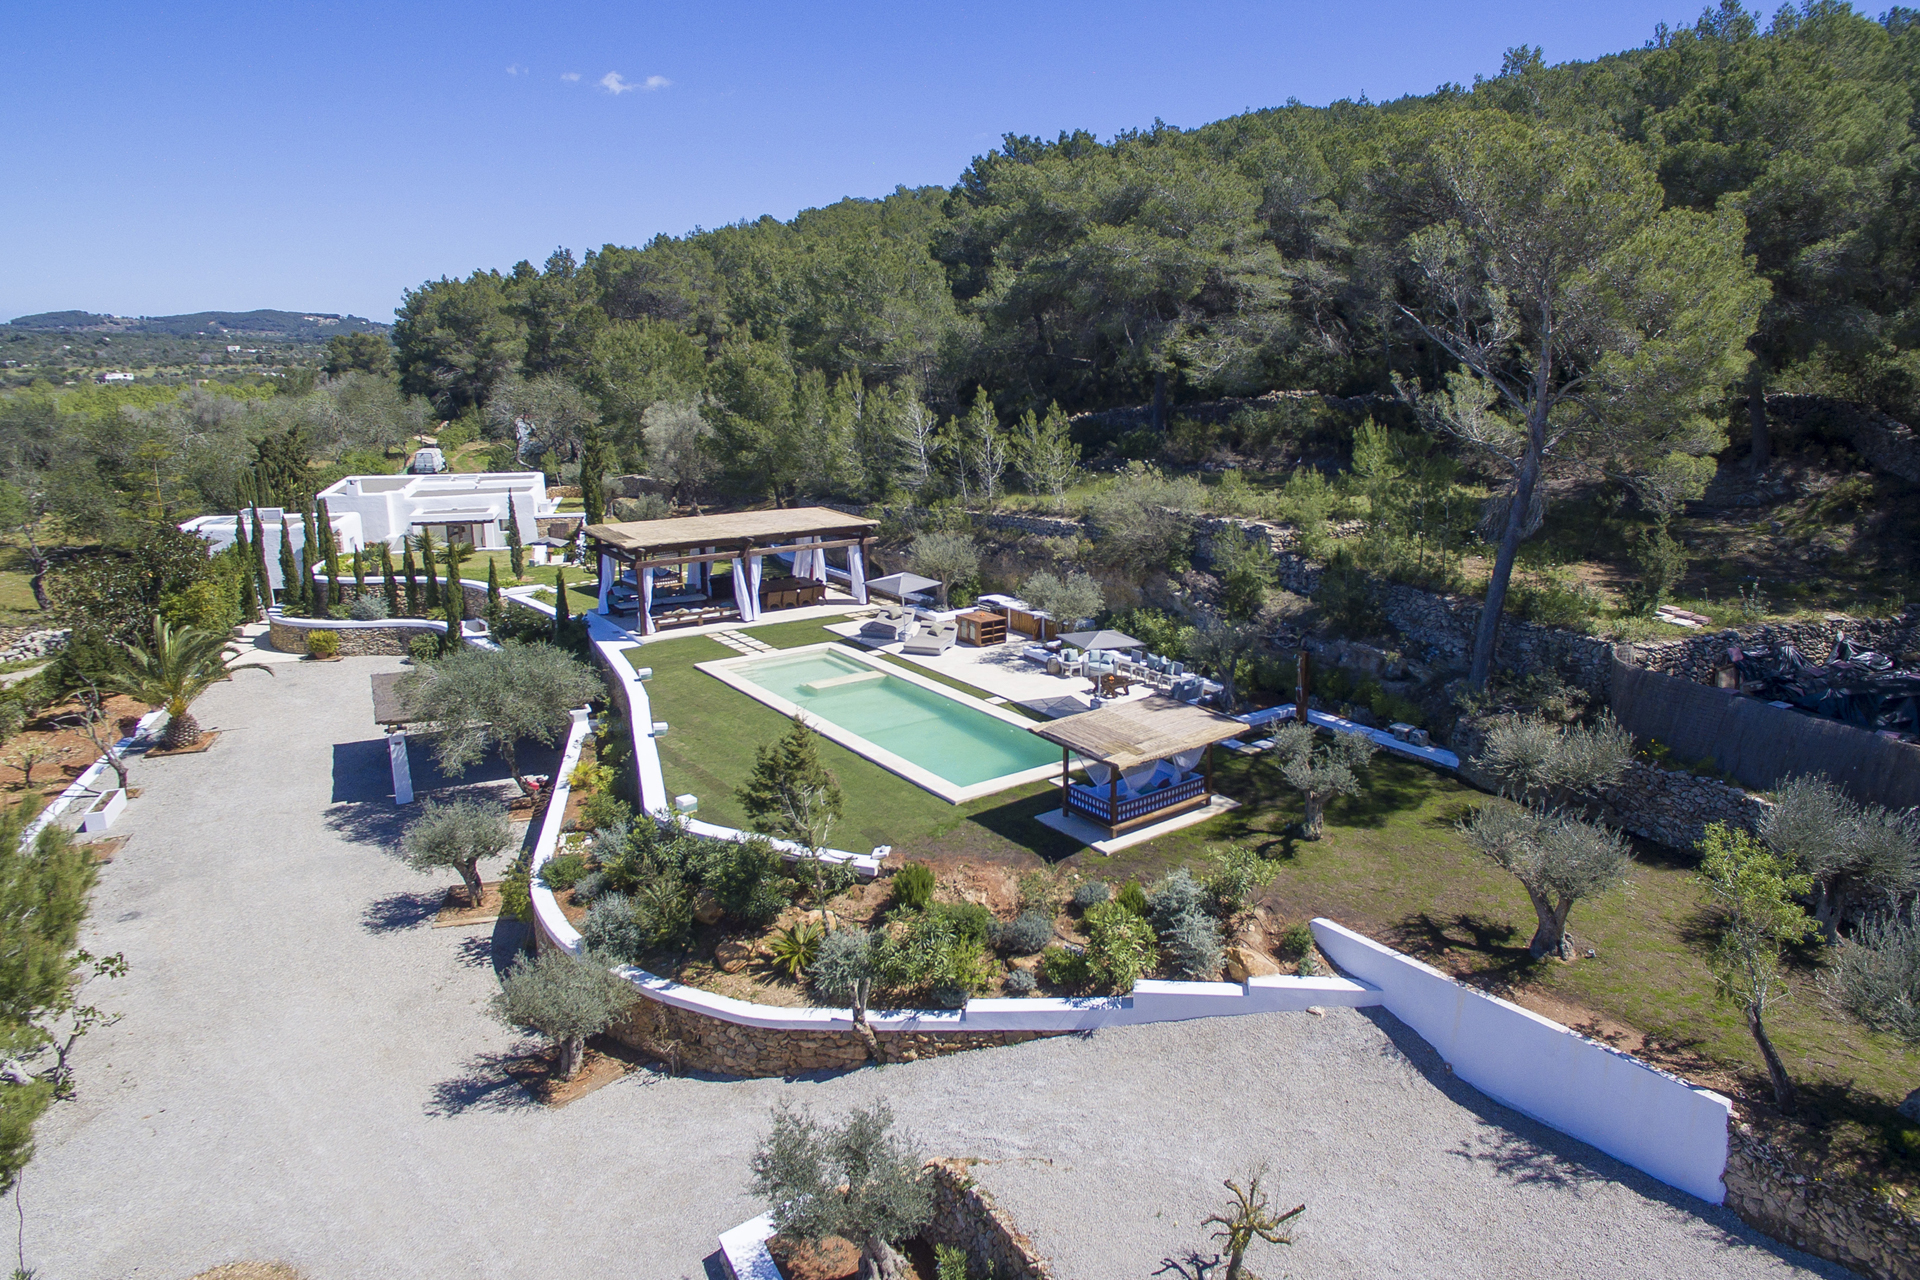 Charming 4 bedrooms finca in the countryside of Ibiza